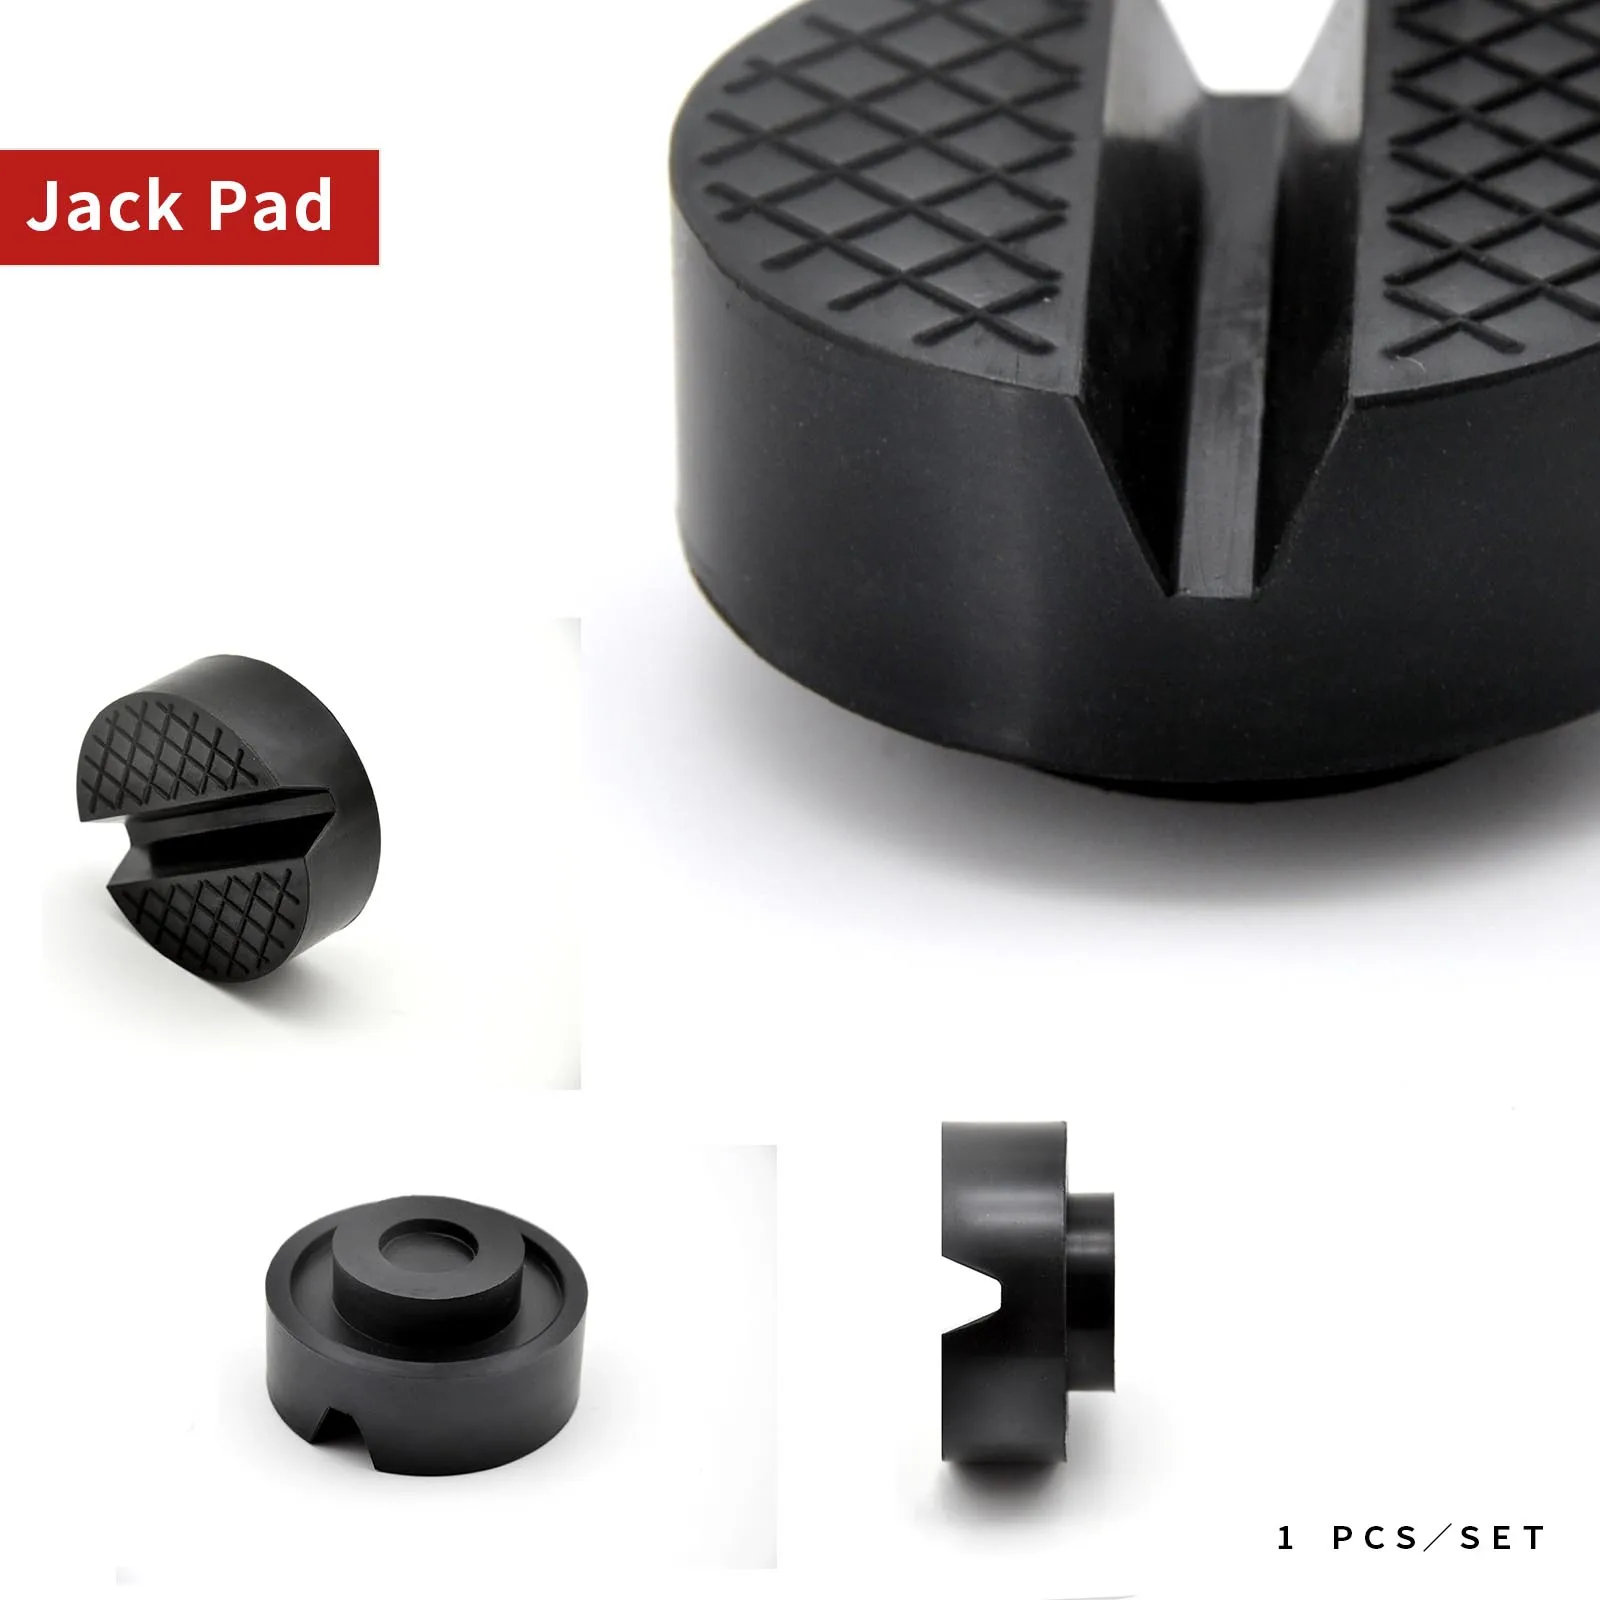 Universal Car Stand Rubber Pads - Lift Jack Adapter for Various Car Models - $20.18